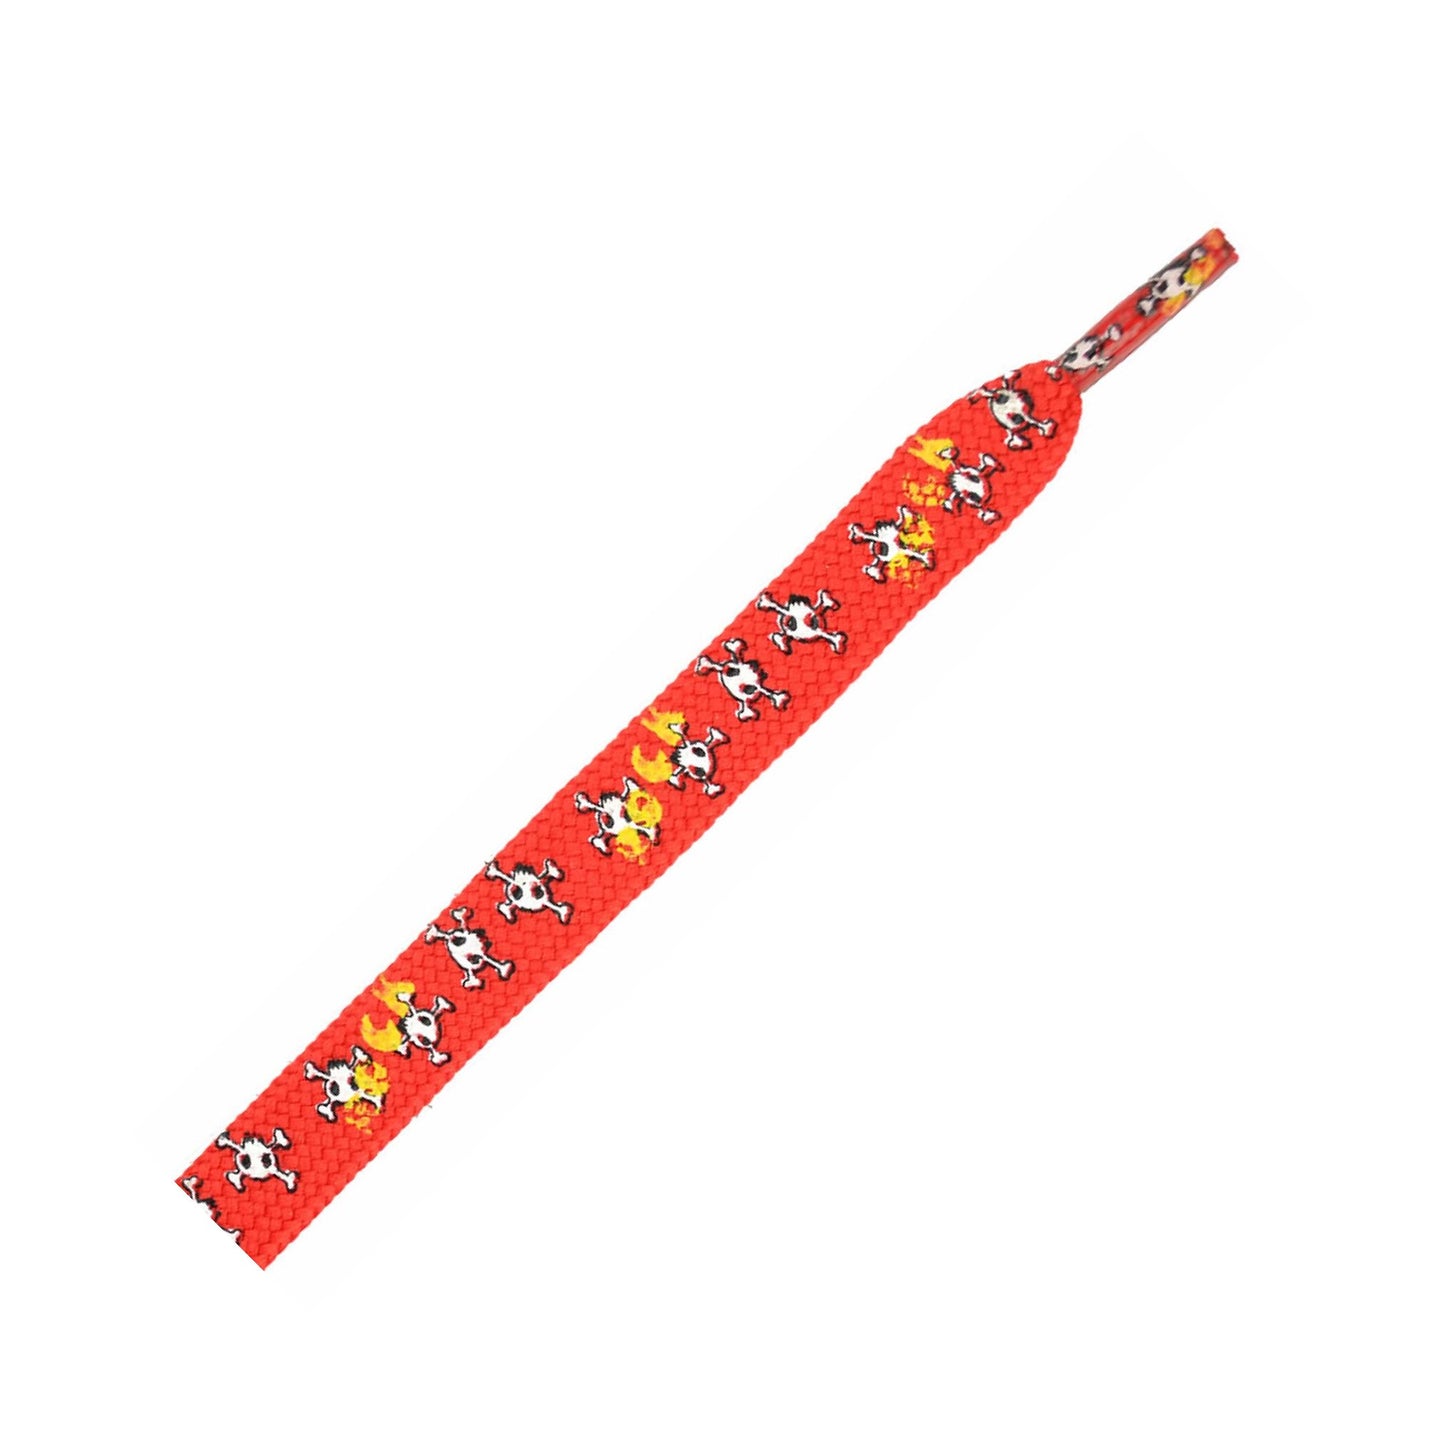 110cm flat Shoe Laces - red with skulls